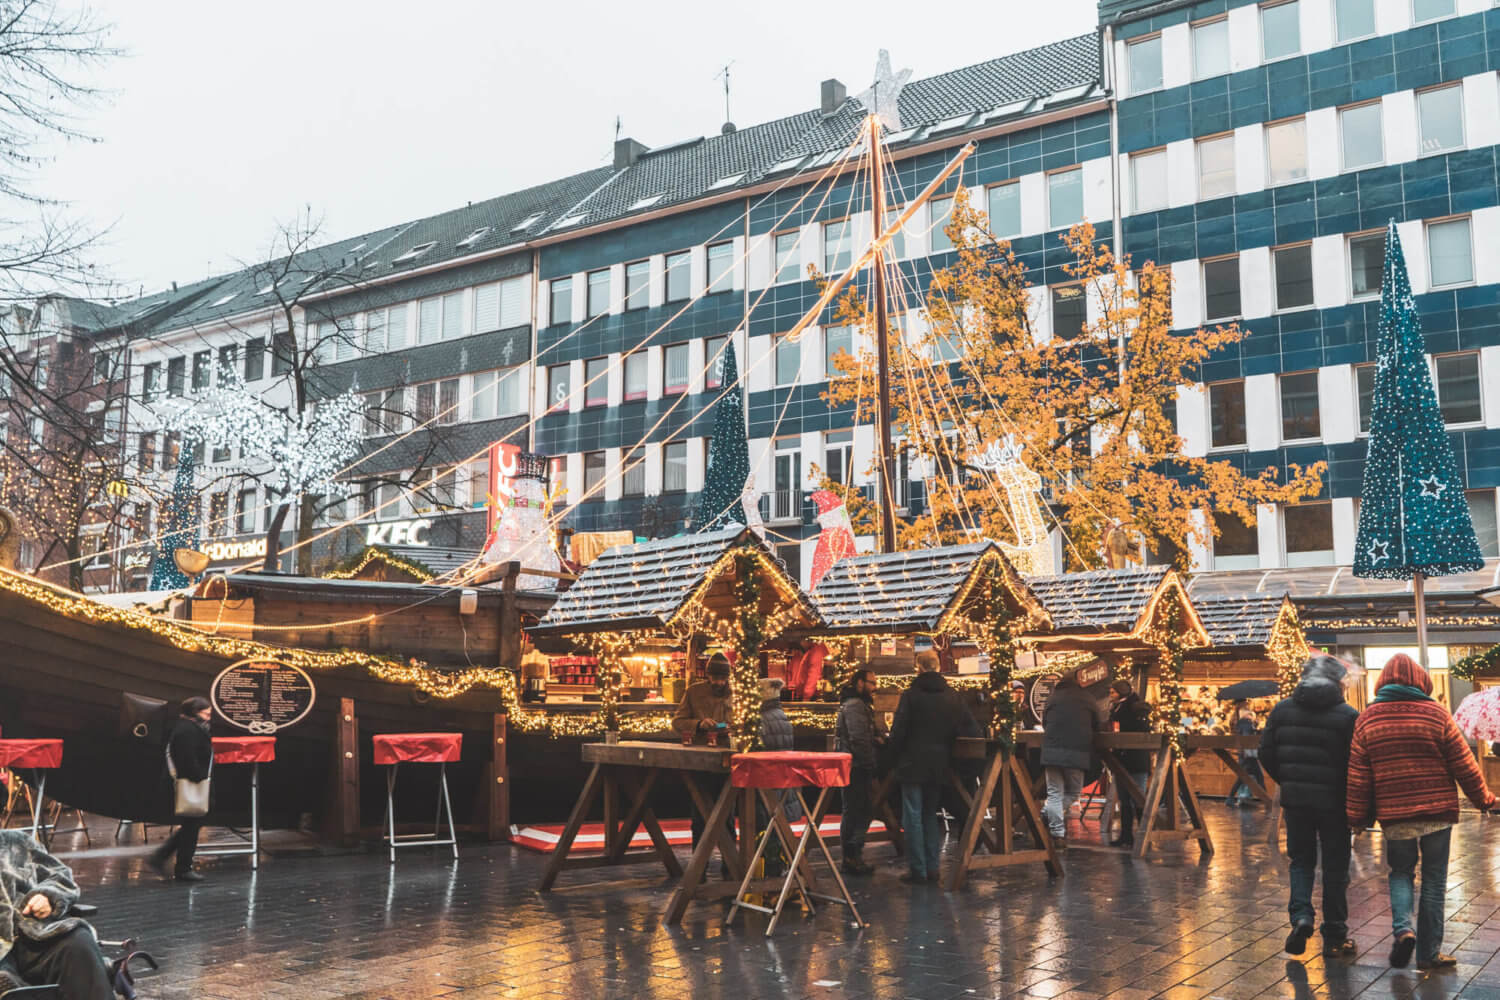 Duisburg Christmas Market, one of the best Christmas markets in Germany